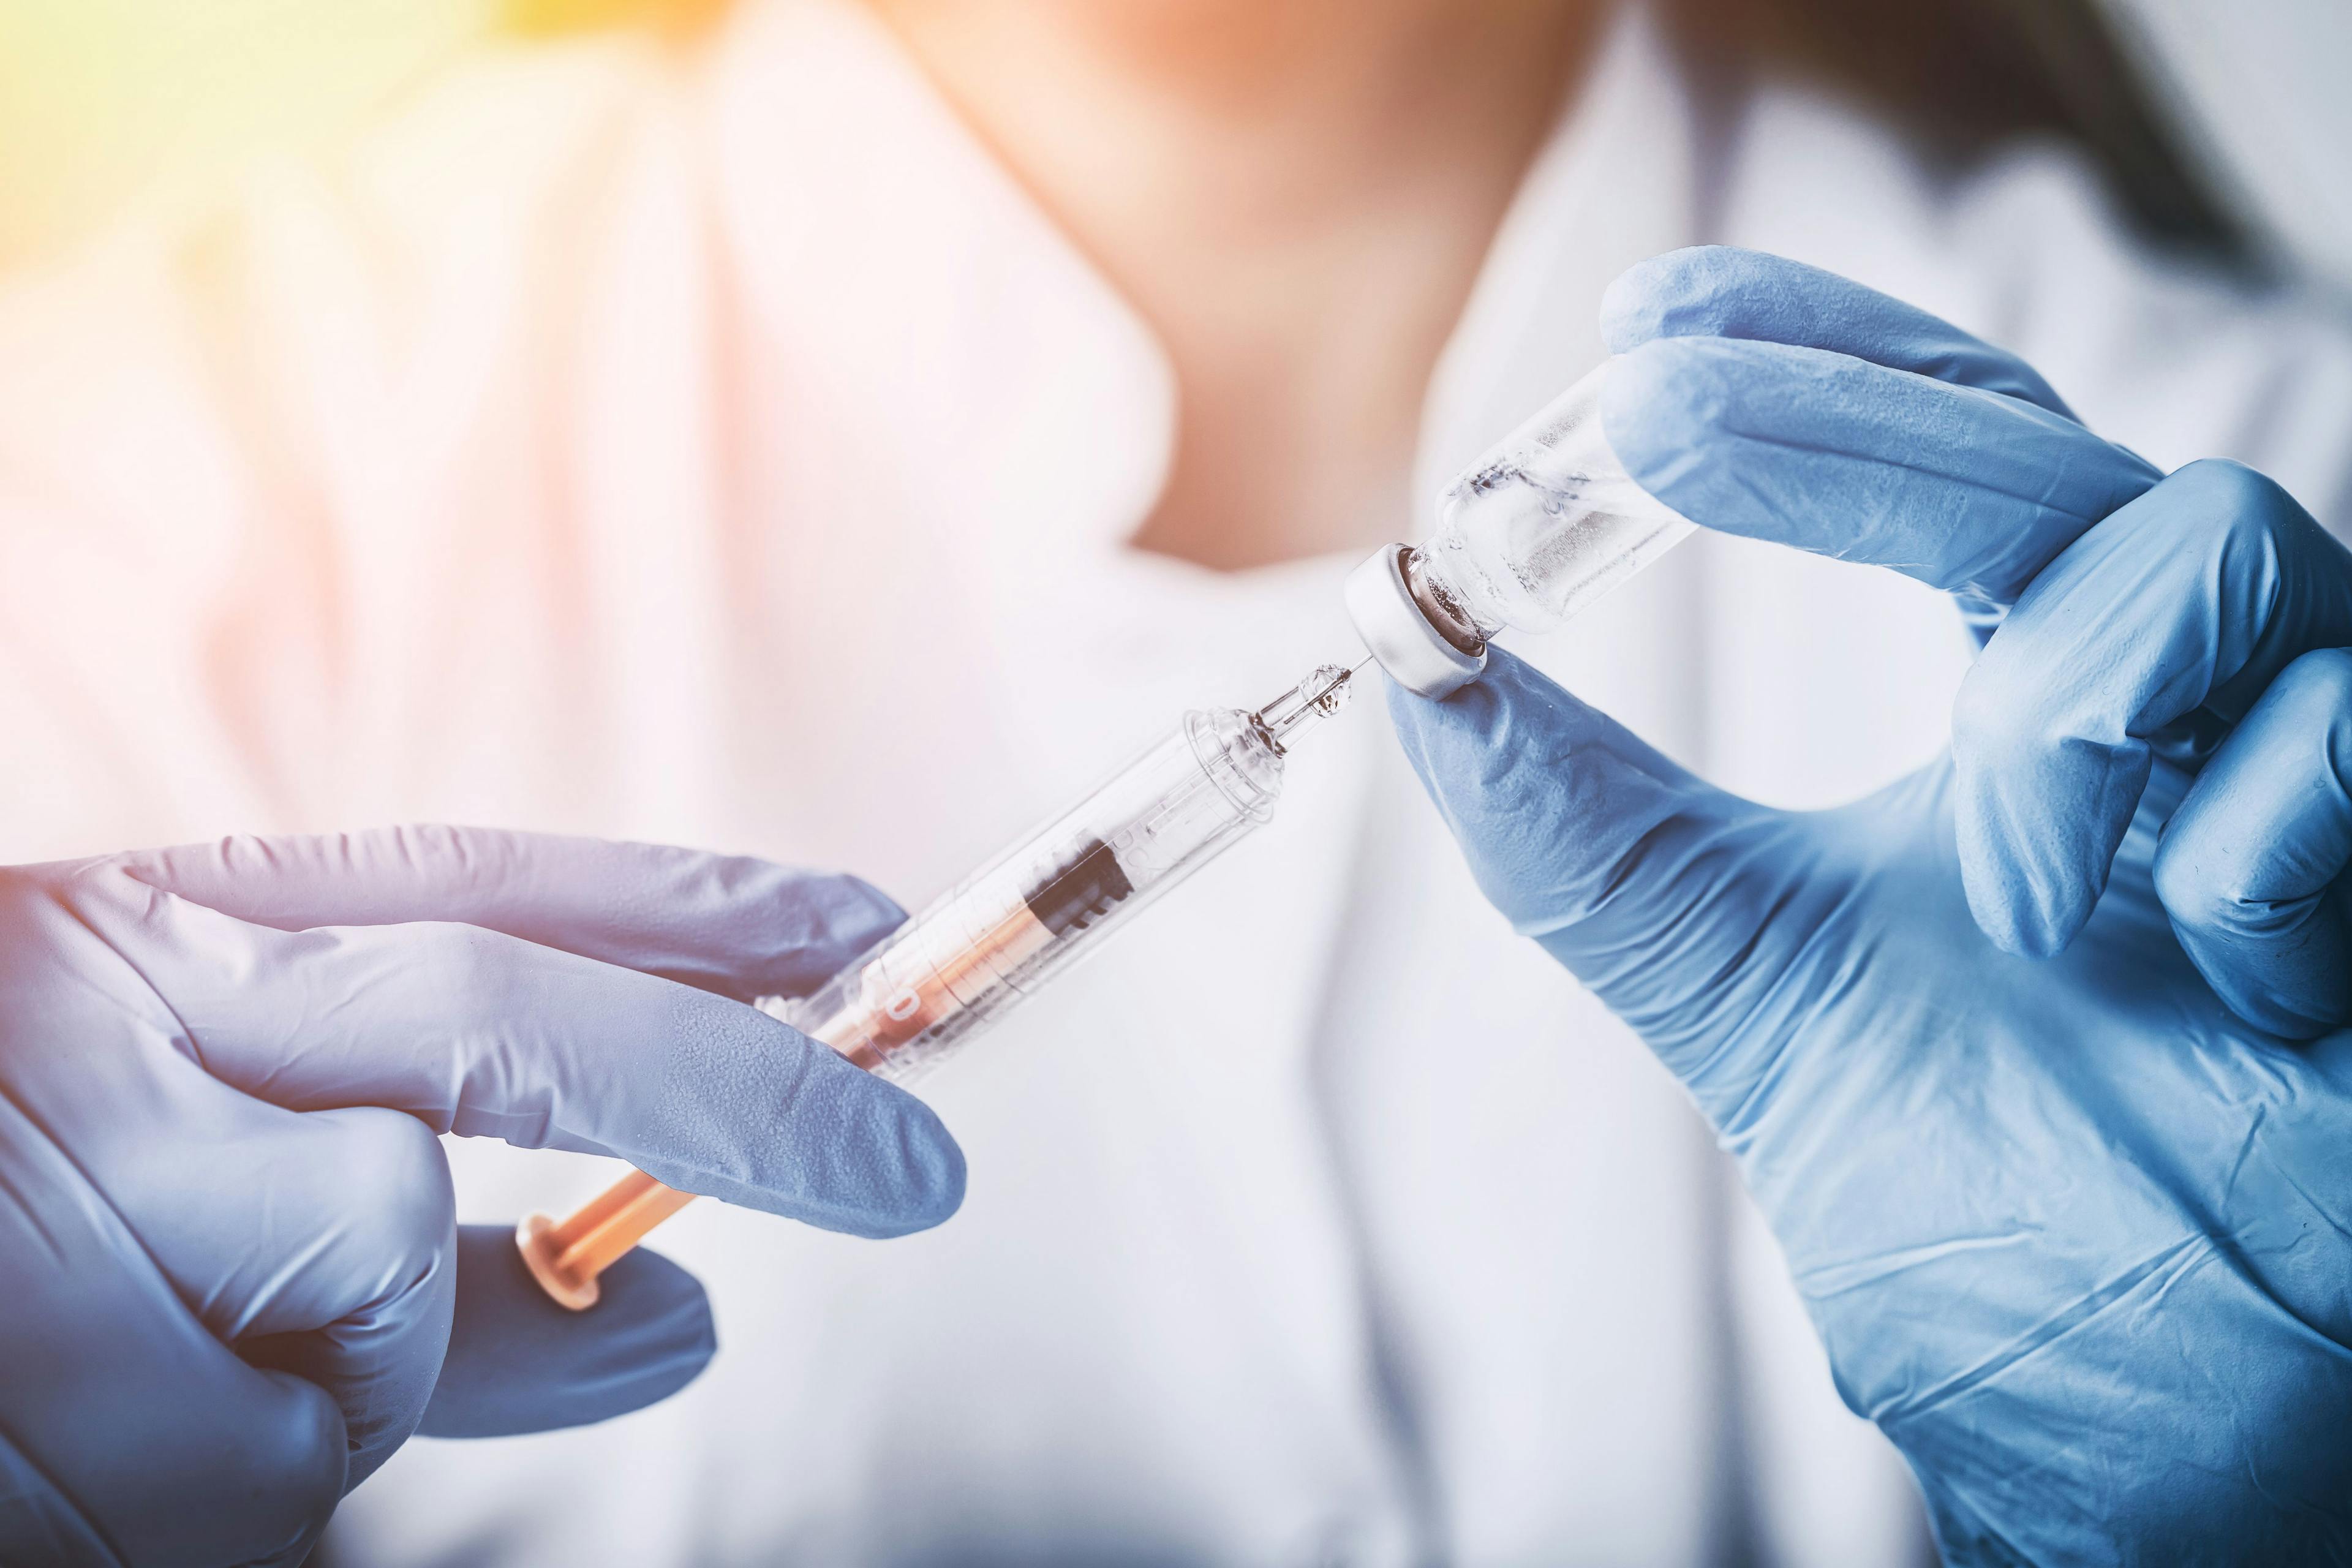 Interest Grows in Long-Acting Injectables for HIV Treatment